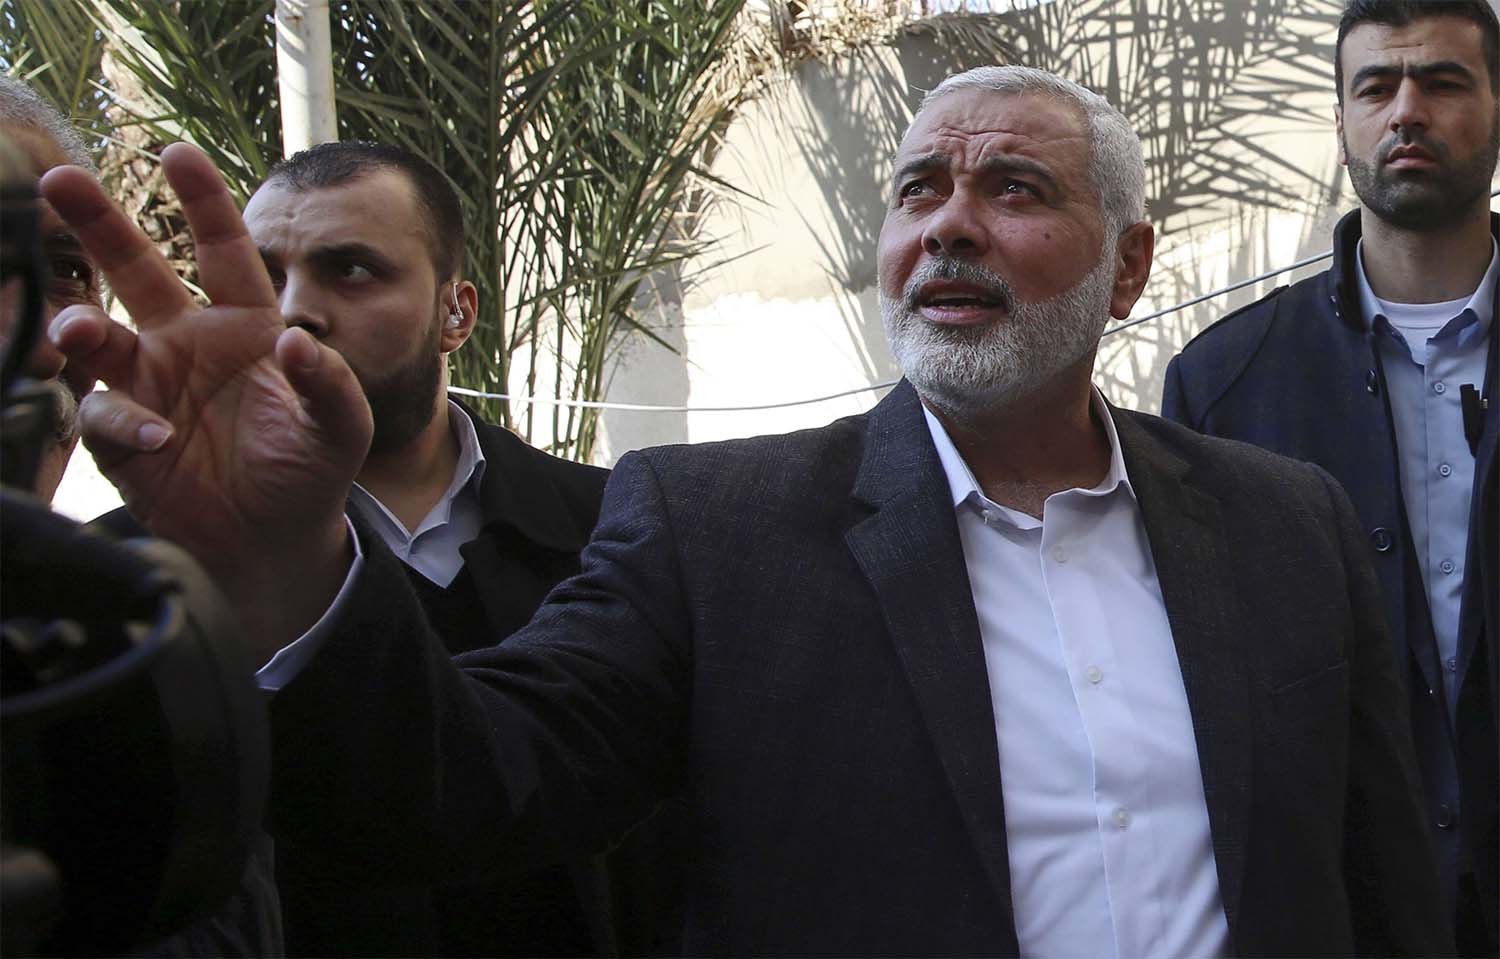 Haniyeh's visit to Morocco is a bid to seek broader support for Palestinians after the Gaza conflict